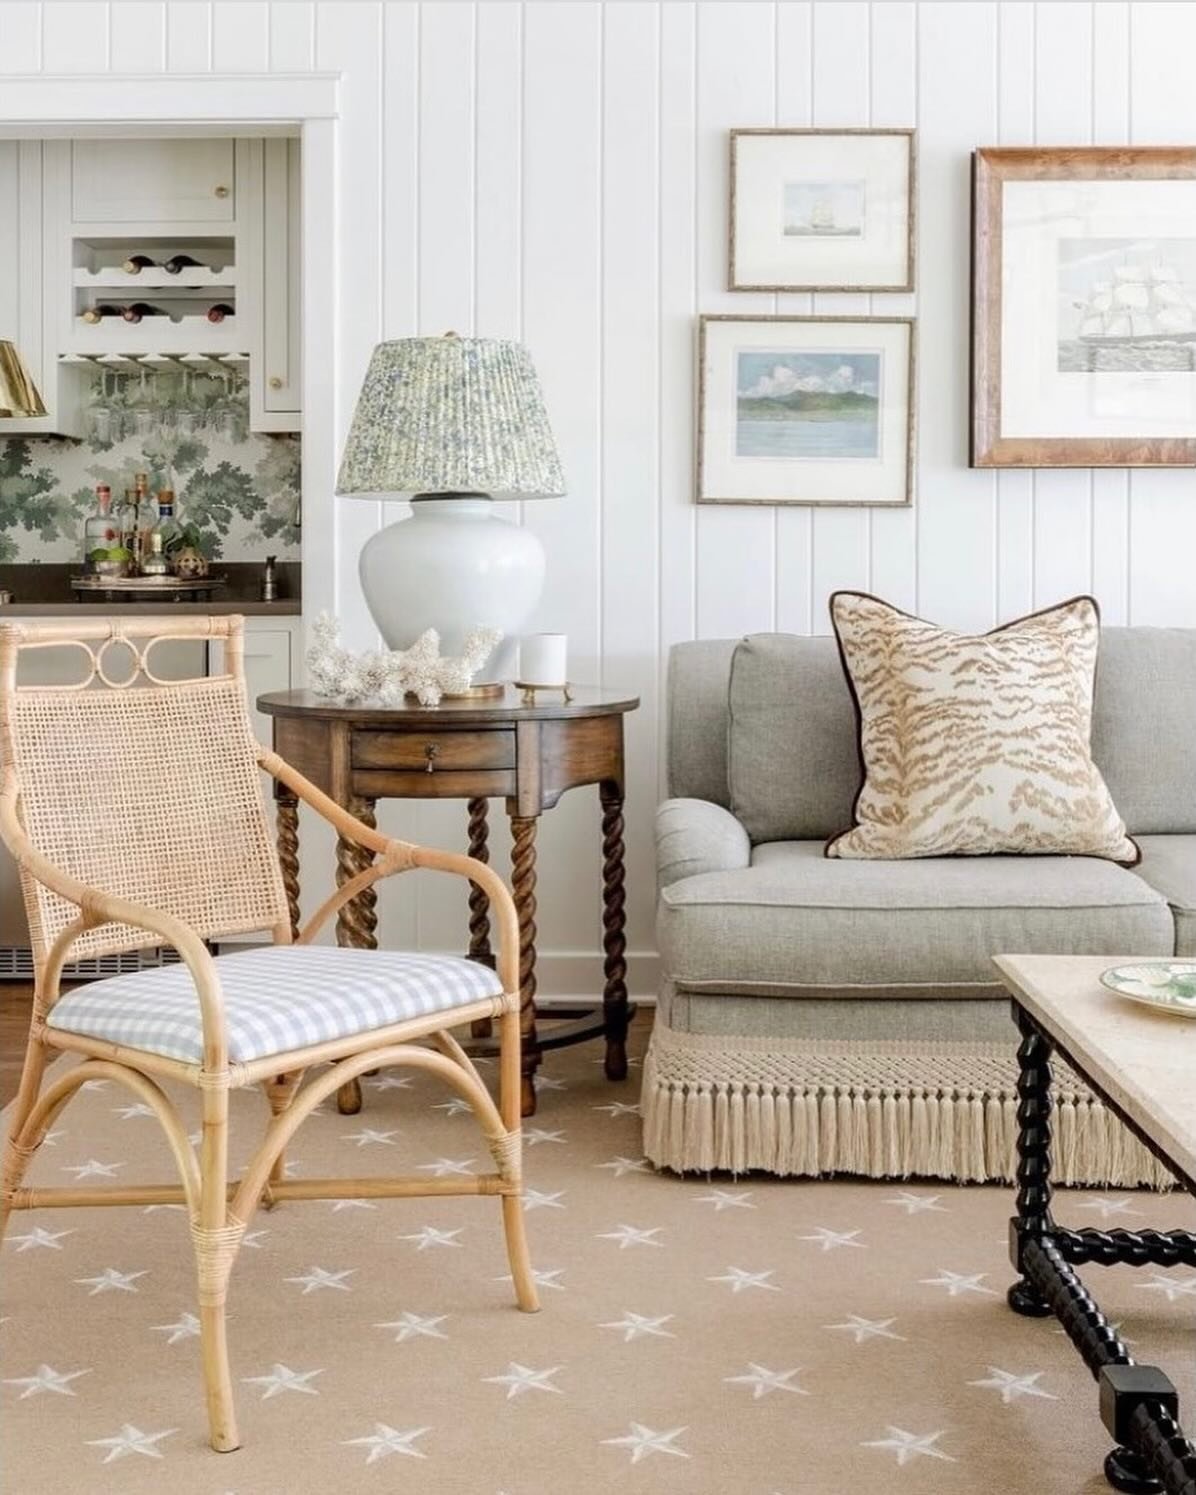 ✨Inspiration✨ Hello stunning star patterned rug! This beautiful living room checks all the boxes for texture and pattern mixing. We&rsquo;re forever fans of woven textures like this pretty rattan accent chair. Throw in a sassy tassel trim, a pretty f